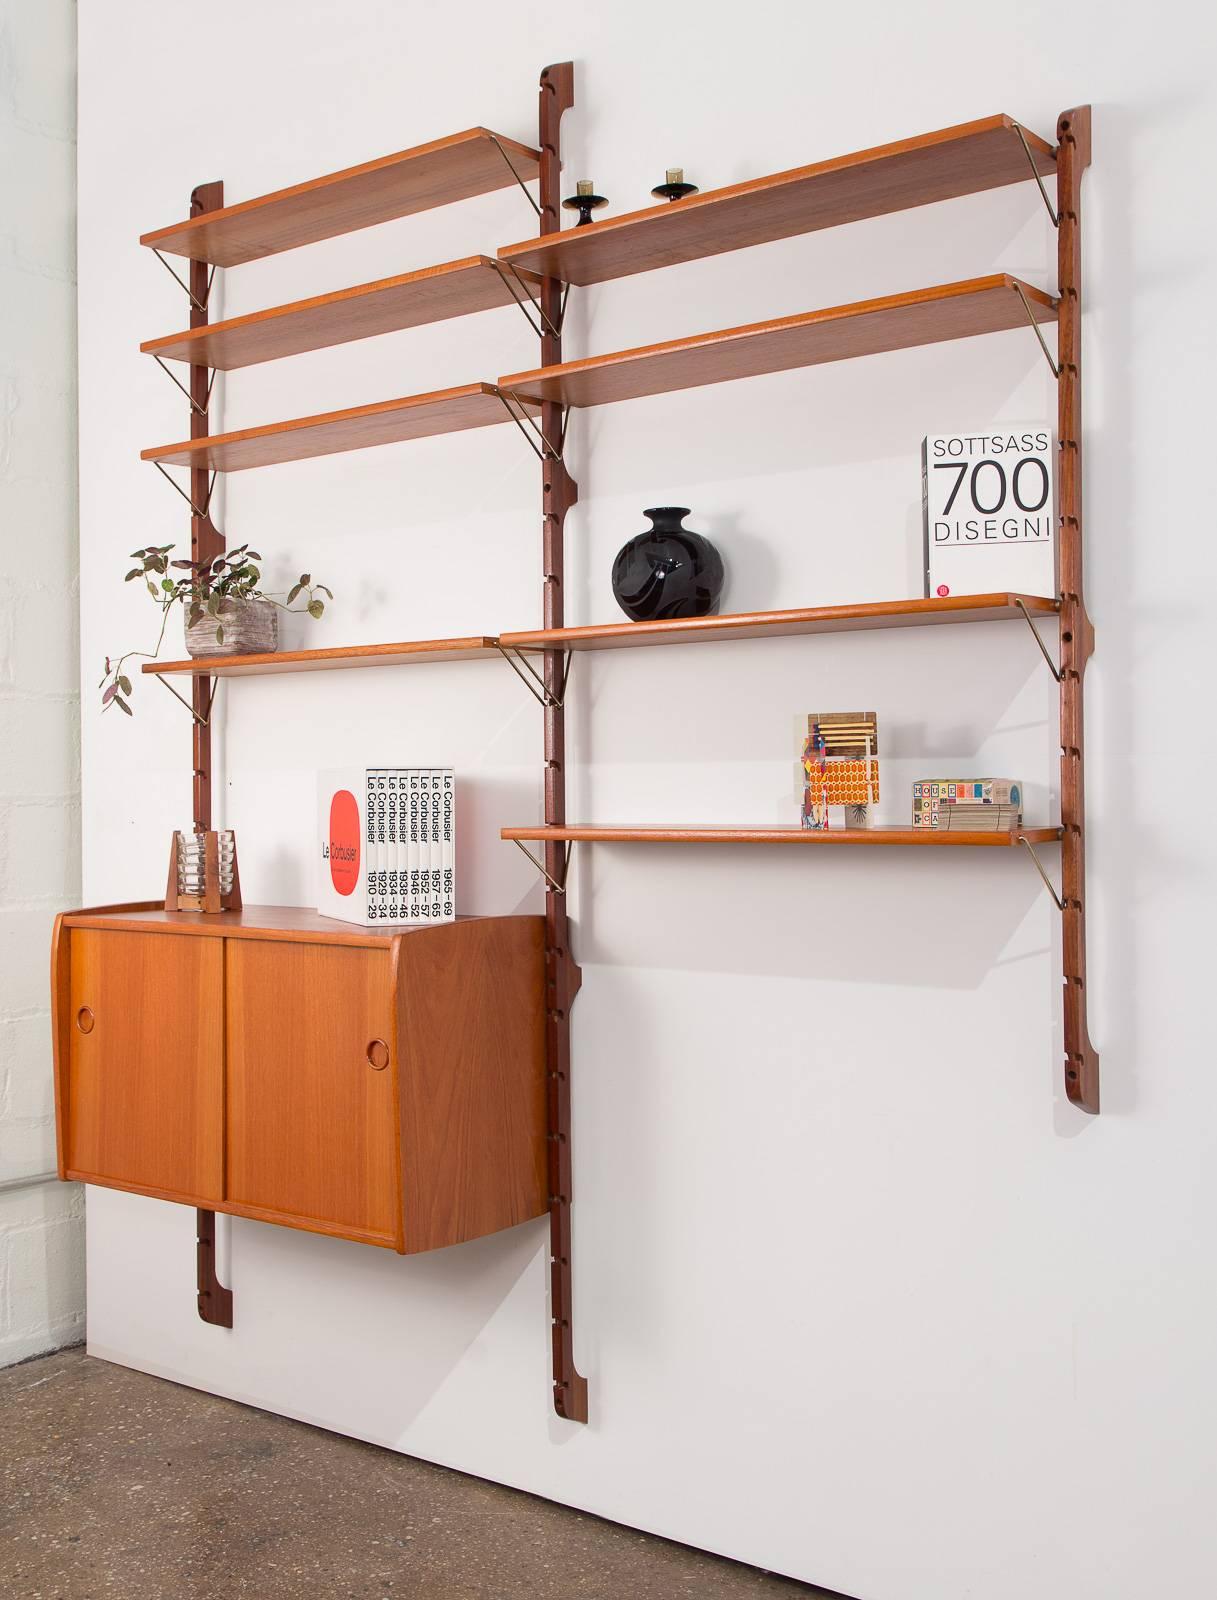 Beautiful 1960s Norwegian wall unit for Blindheim Møbelfabrik. This modular three-bay teak unit comes with eight shelves and one sliding-door cabinet. The shelves can be installed with the angular brass brackets above or below the shelves. Cabinet